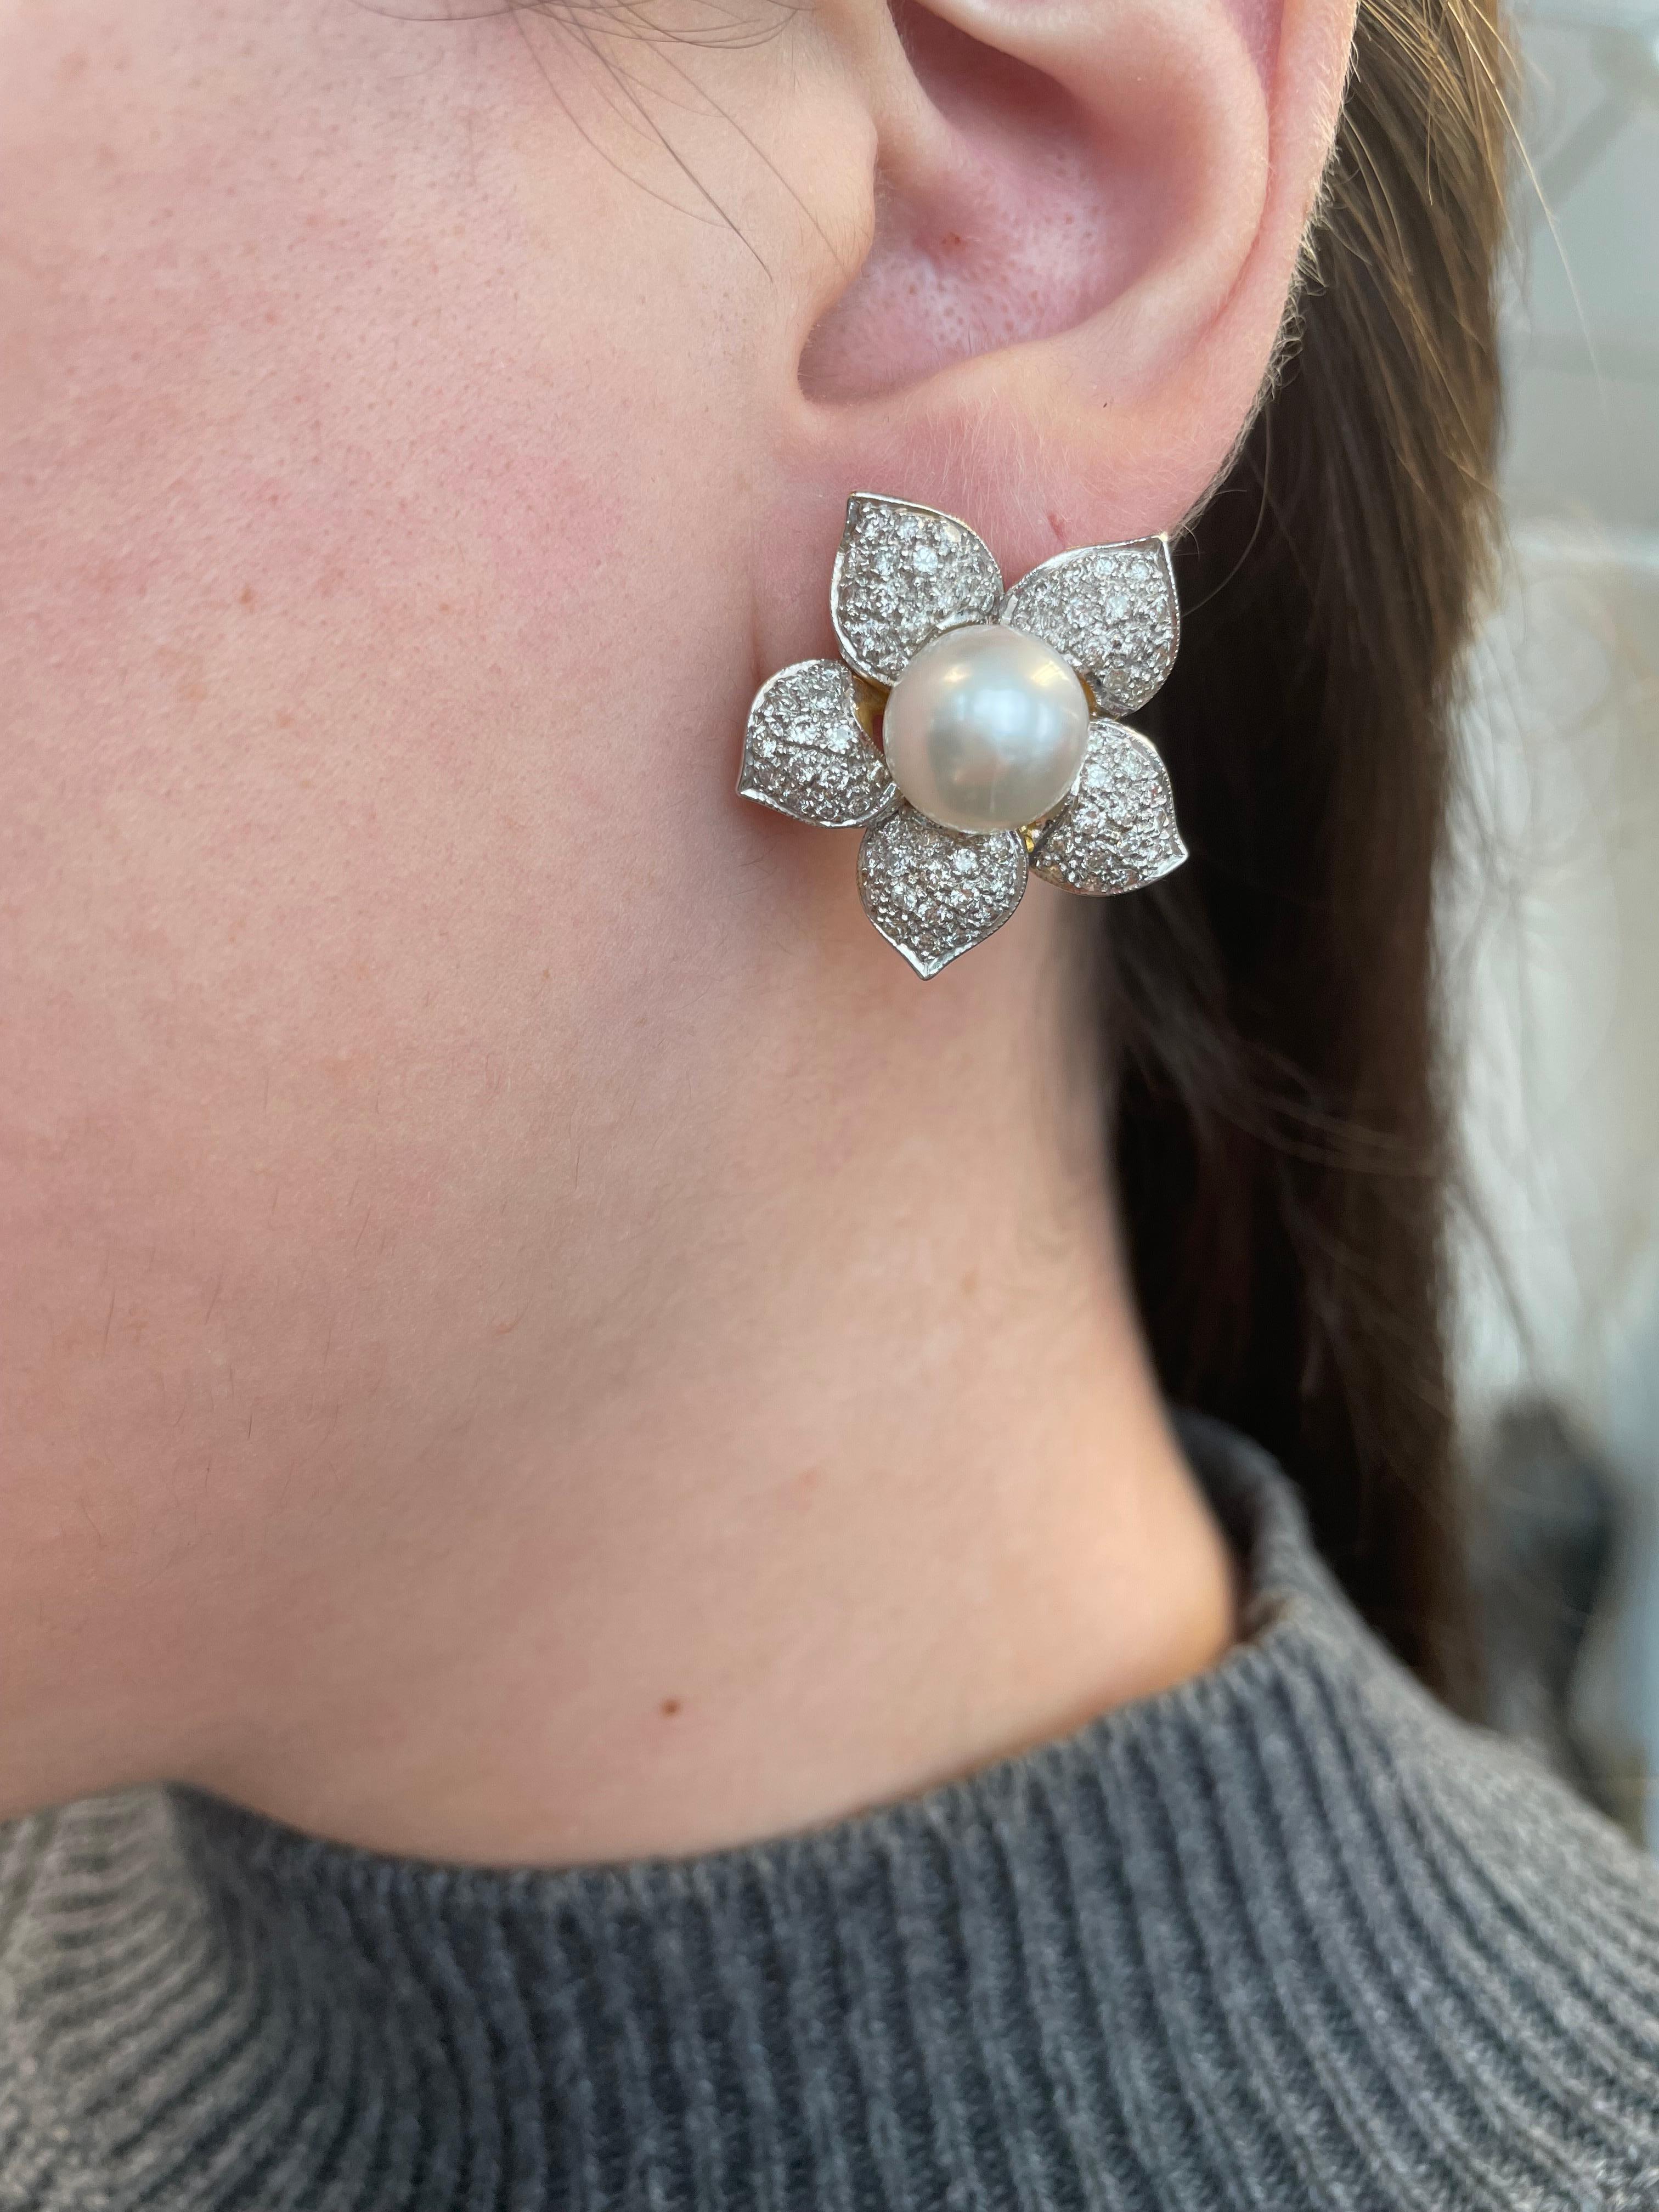 Lovely diamond and pearl floral earrings.
Approximately 2 carats of round diamond earrings, H/I color and SI clarity. Whit and yellow gold.
Accommodated with an up to date appraisal by a GIA G.G. upon request. Please contact us with any